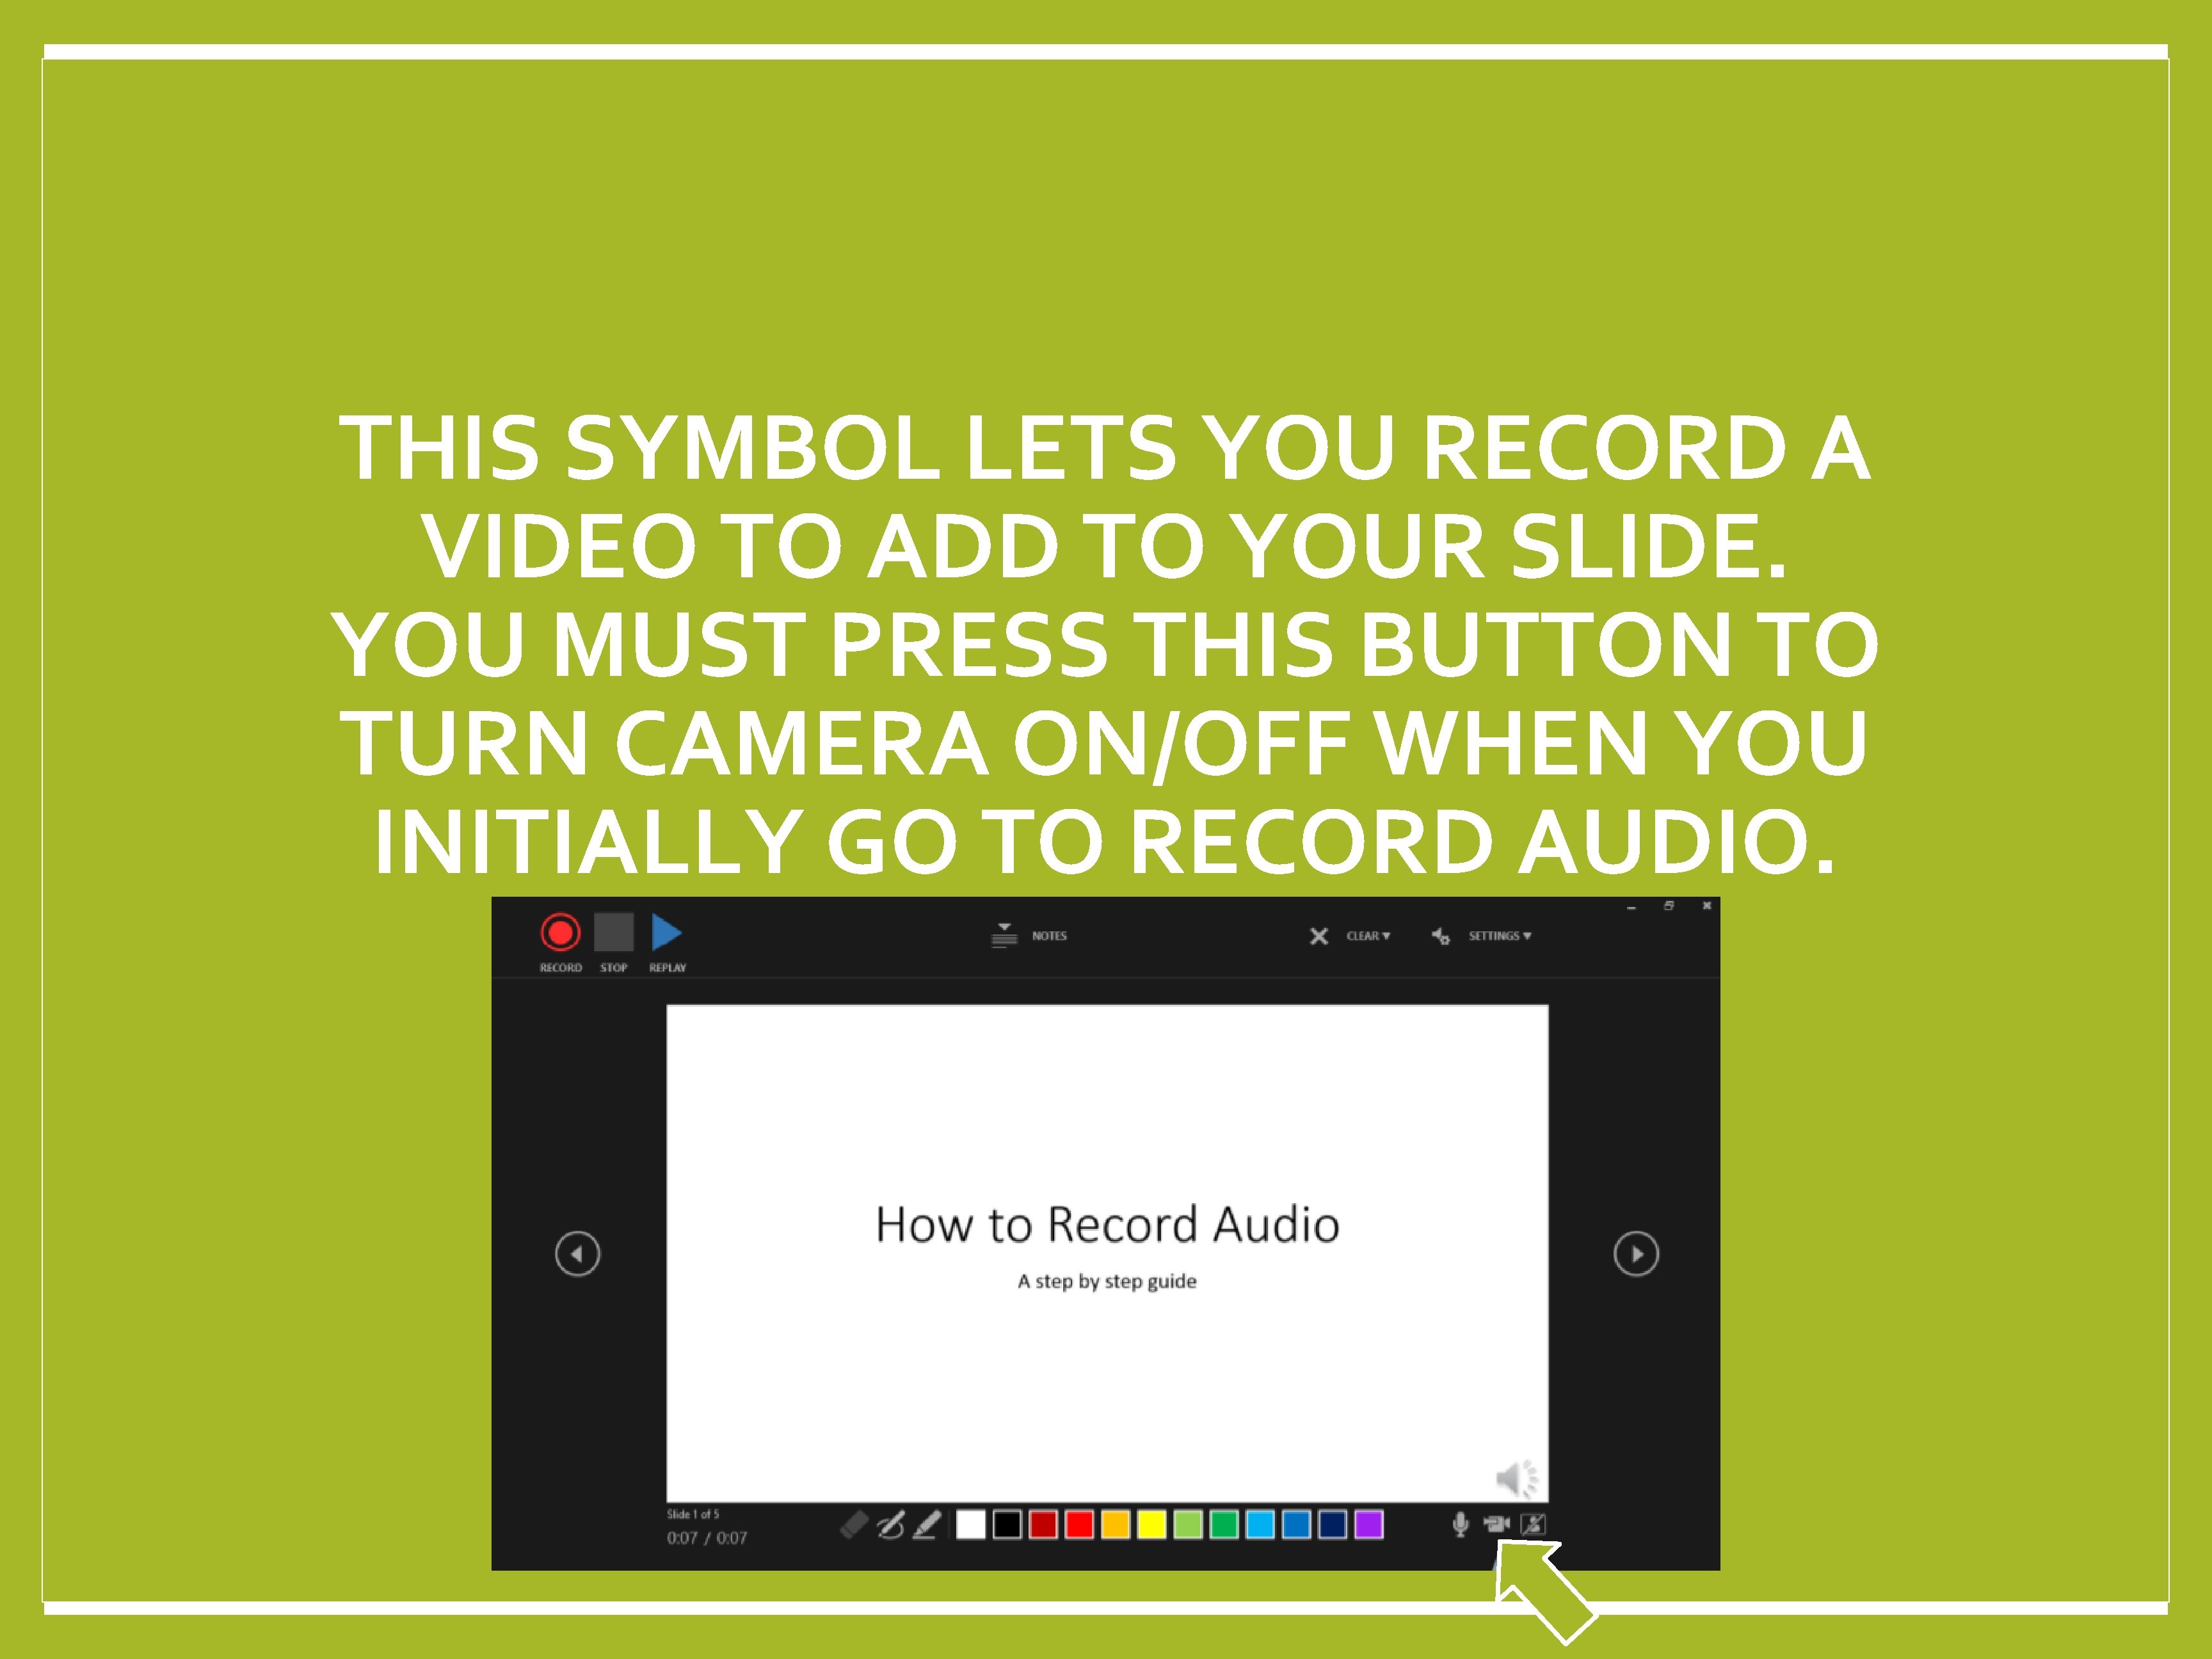 THIS SYMBOL LETS YOU RECORD A VIDEO TO ADD TO YOUR SLIDE. YOU MUST